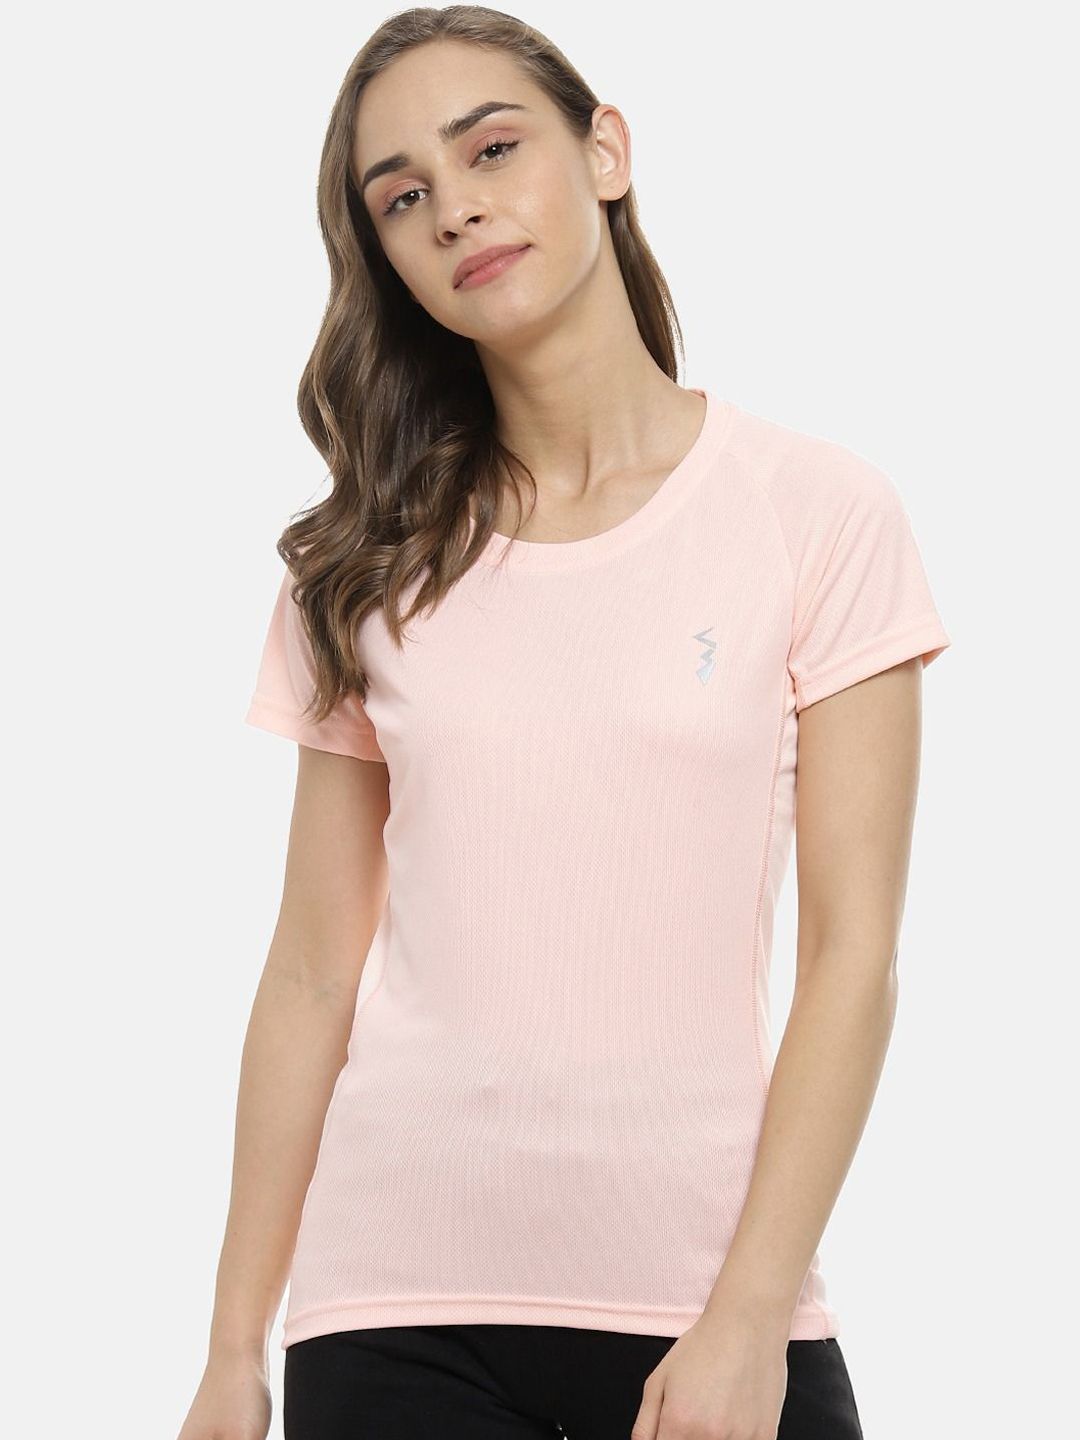 Campus Sutra Women Peach-Coloured Running T-shirt Price in India